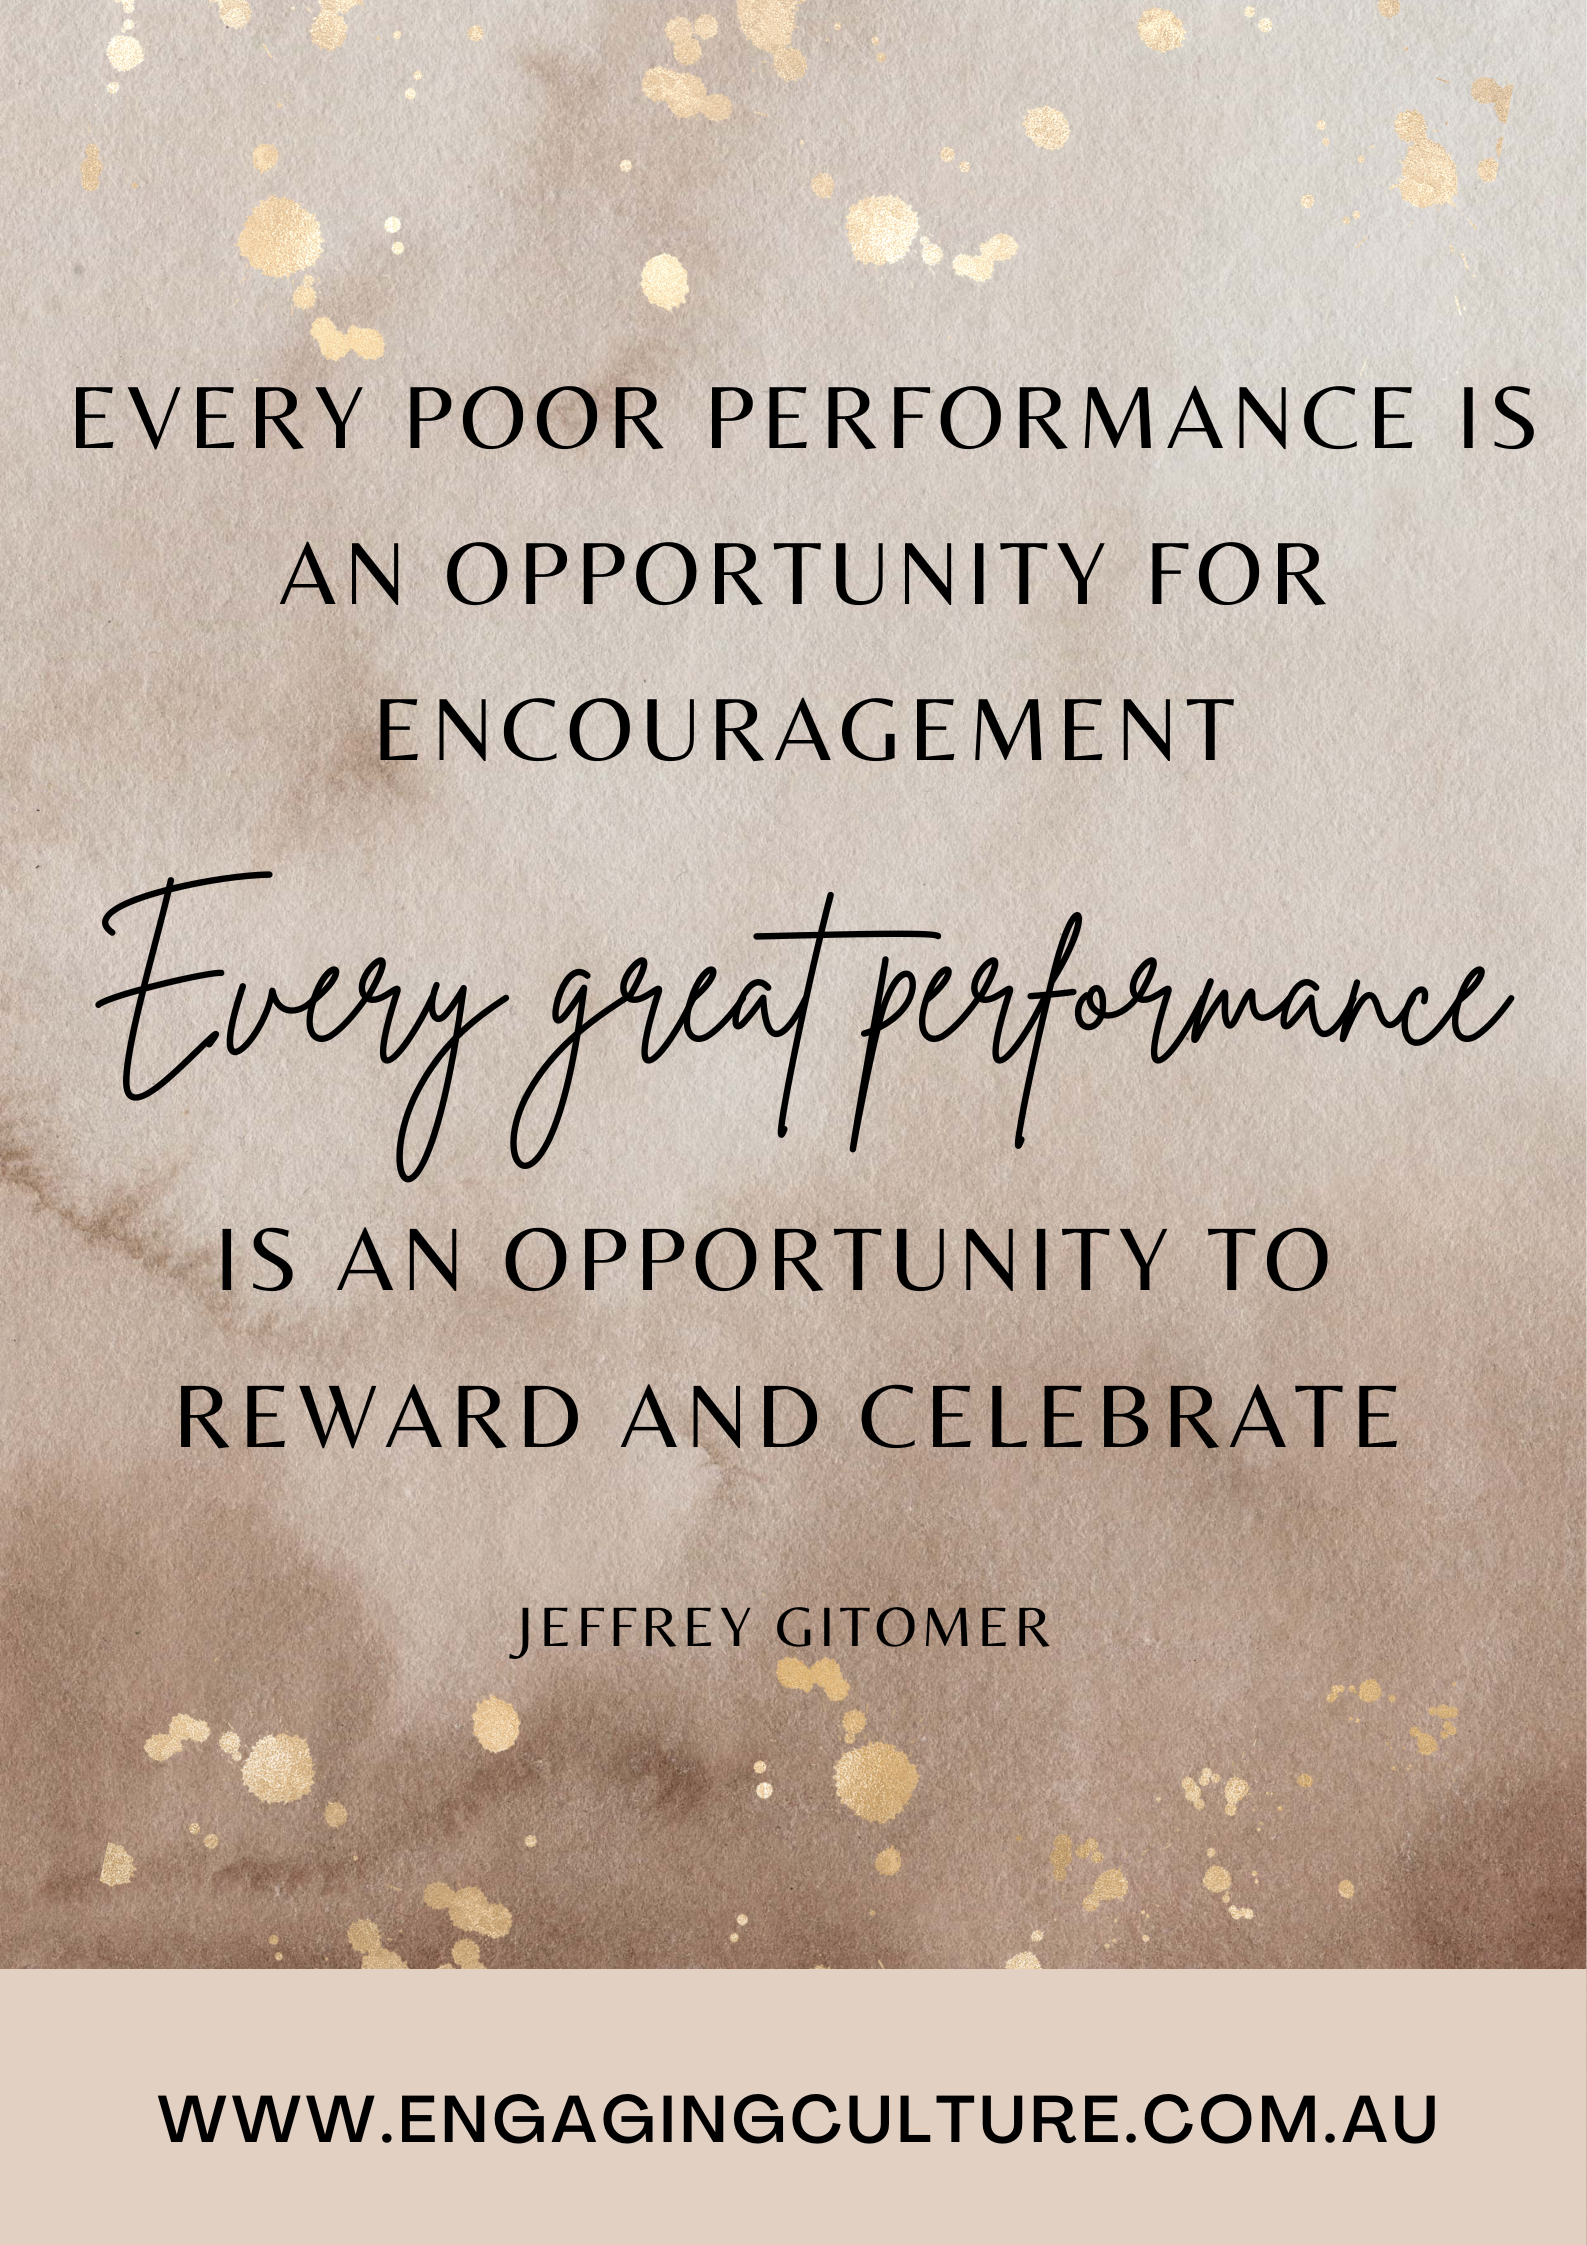 Every poor performance is an opportunity for encouragement. Every great performance is an opportunity to reward and celebrate